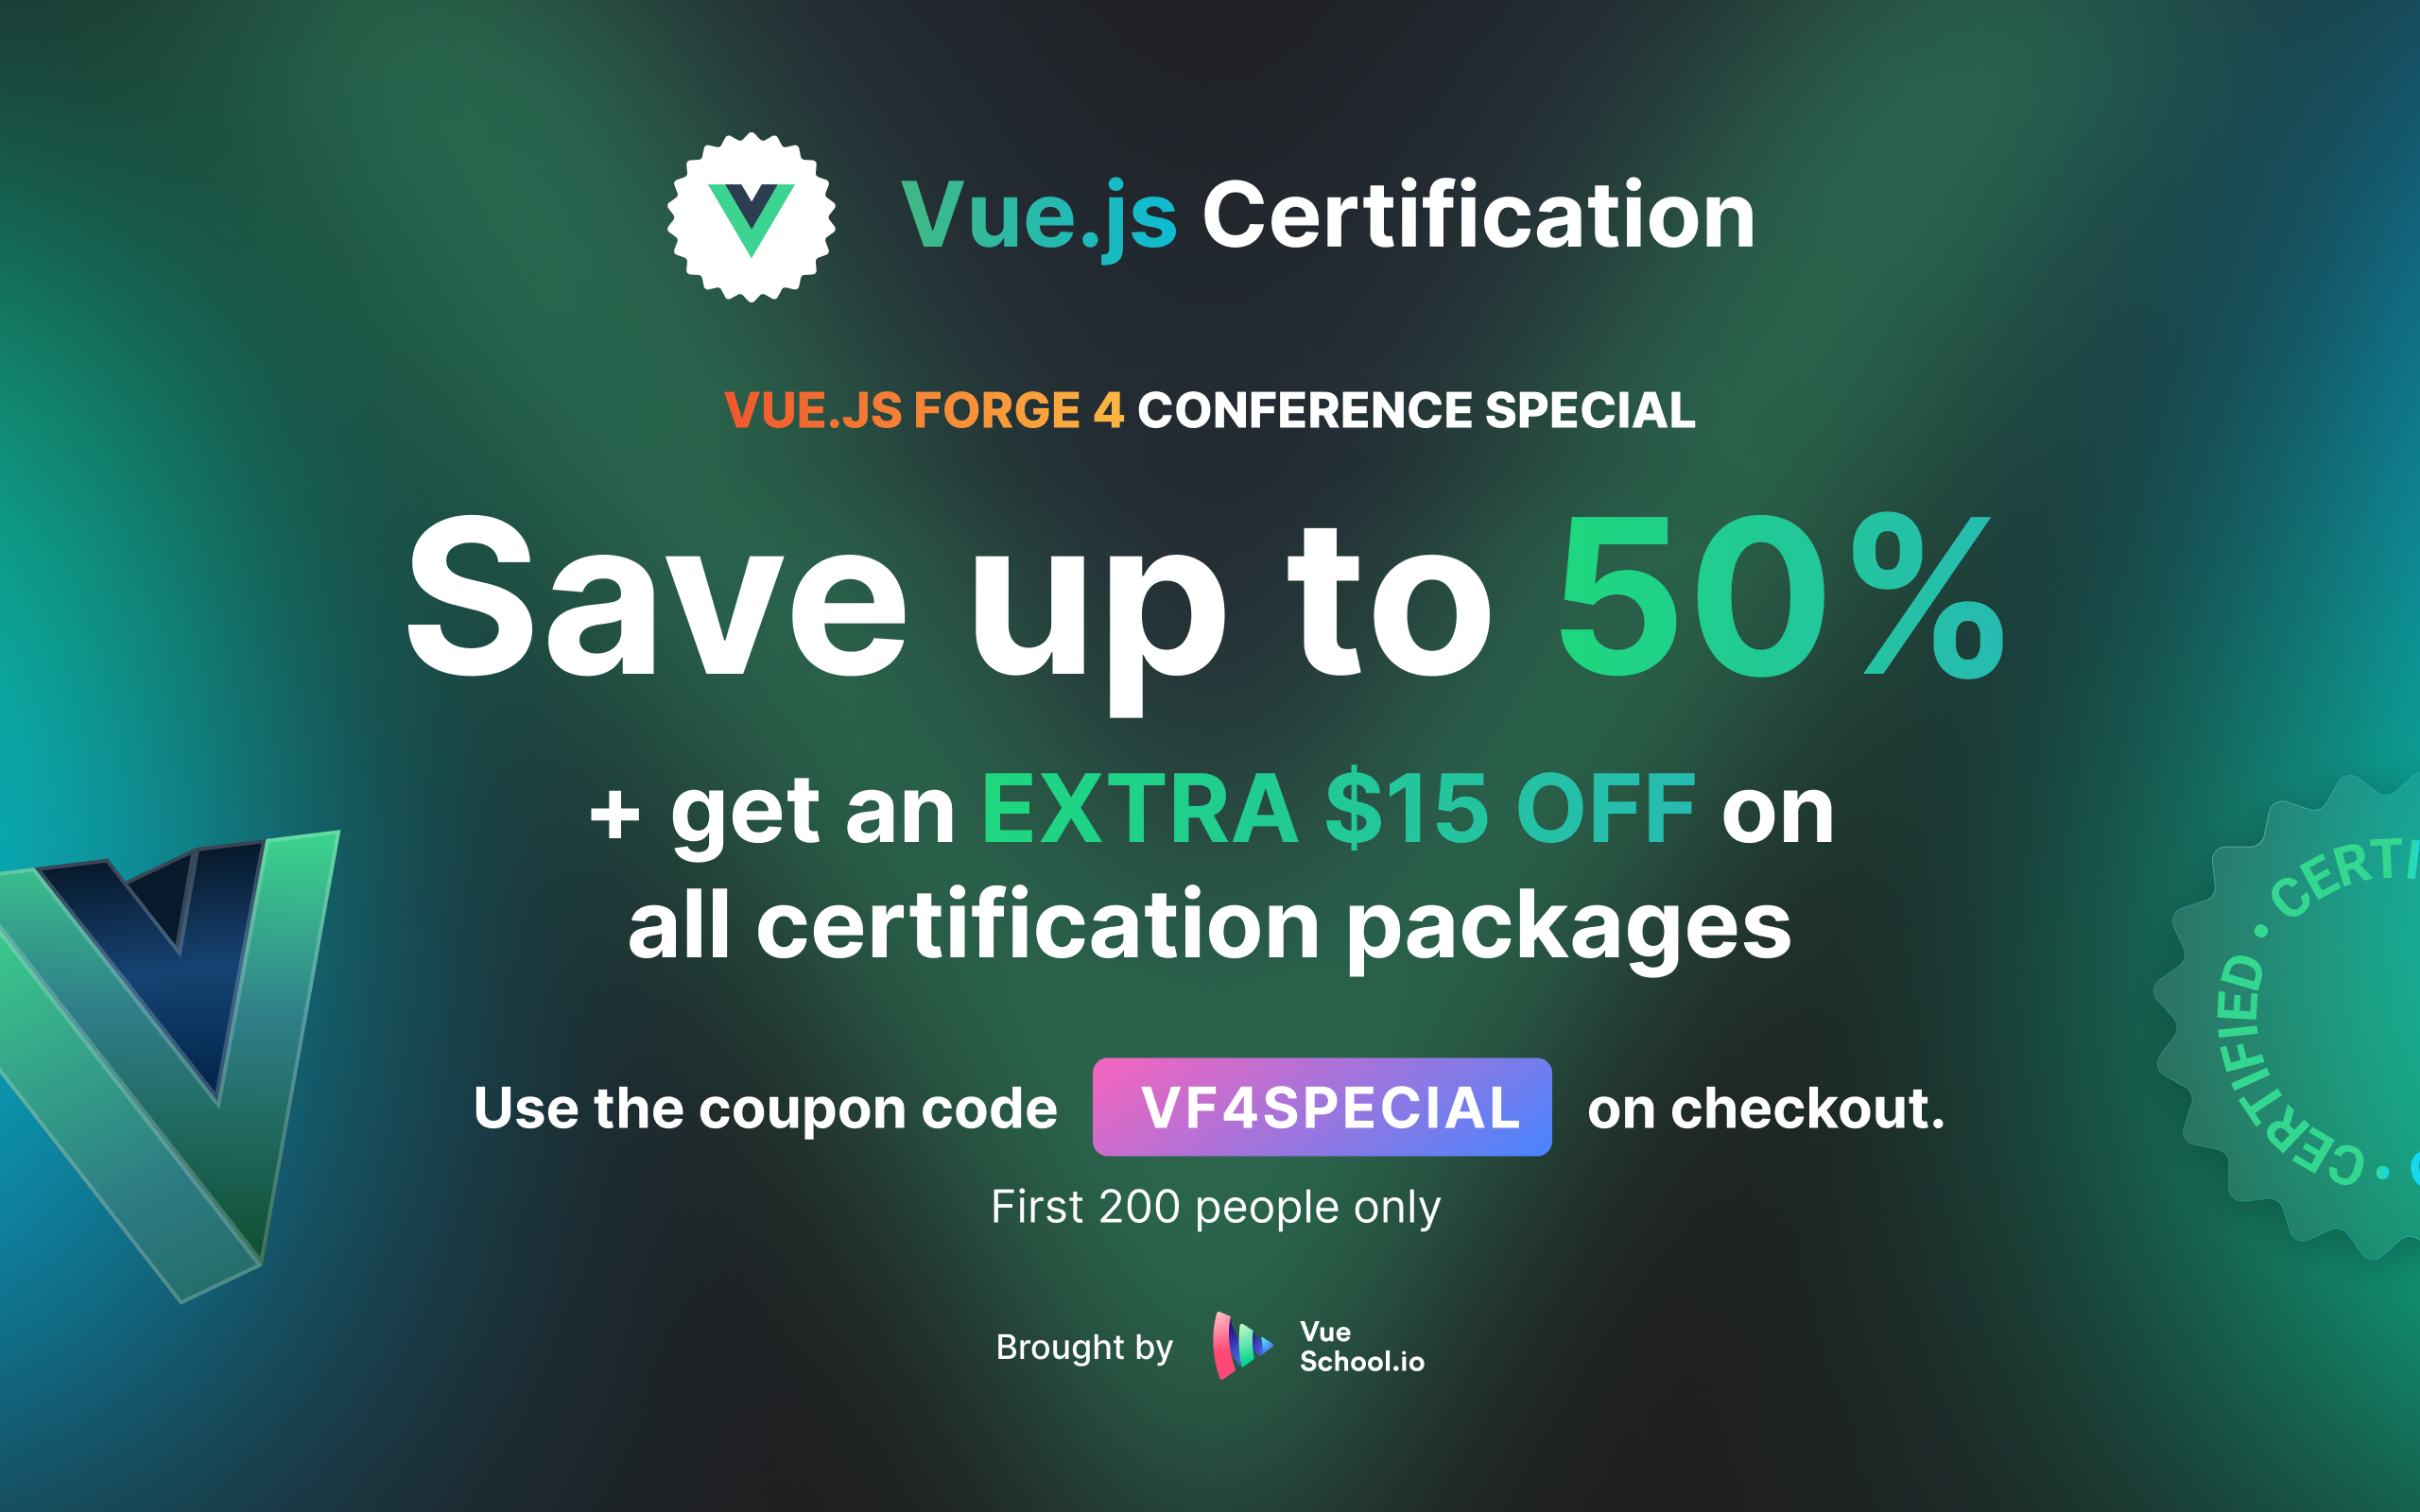 Pre-order and Save up to 50% on Your Official Vue.js Certificate